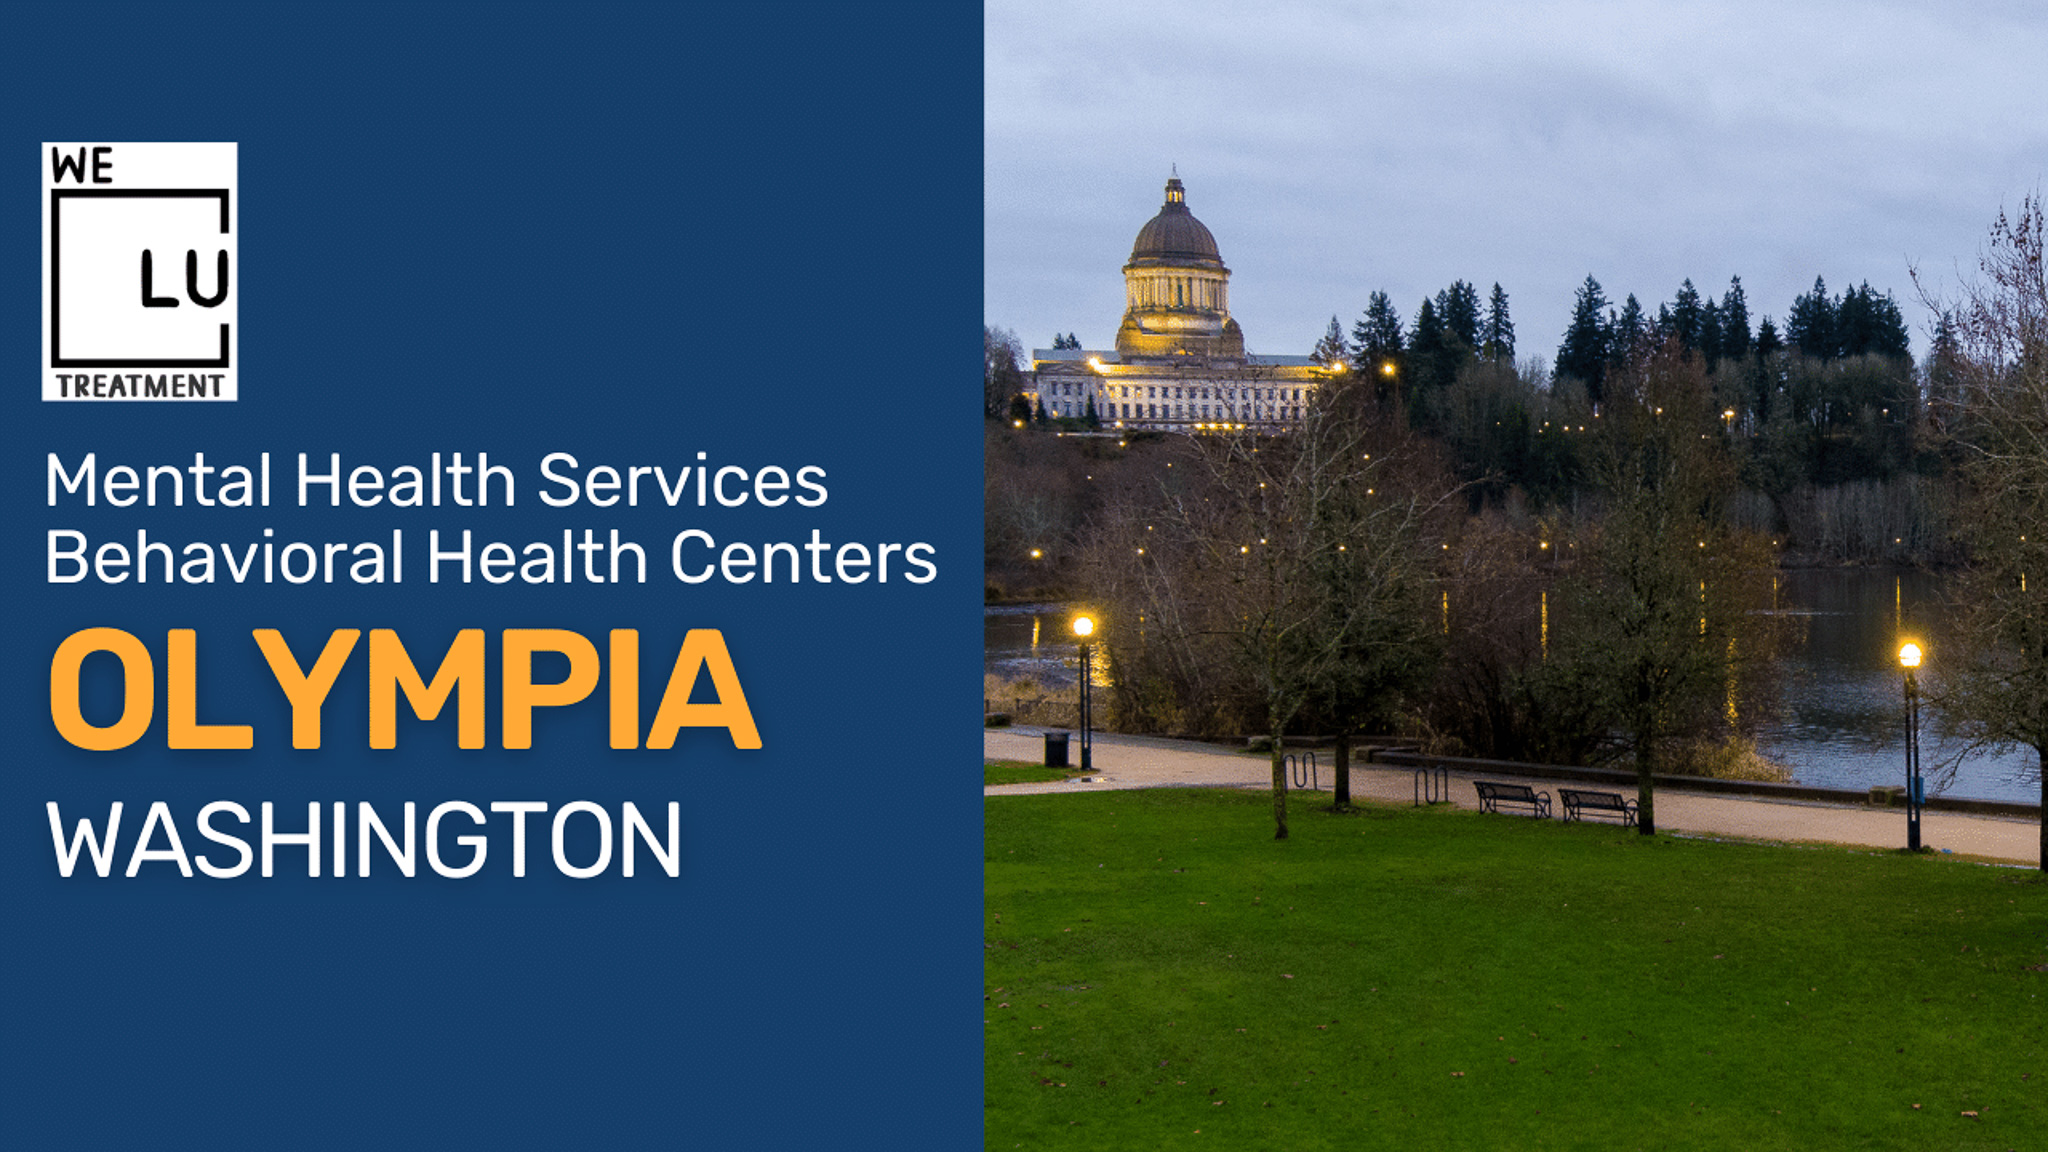 Olympia WA We Level Up treatment center for drug and alcohol rehab detox and mental health services - Image 1